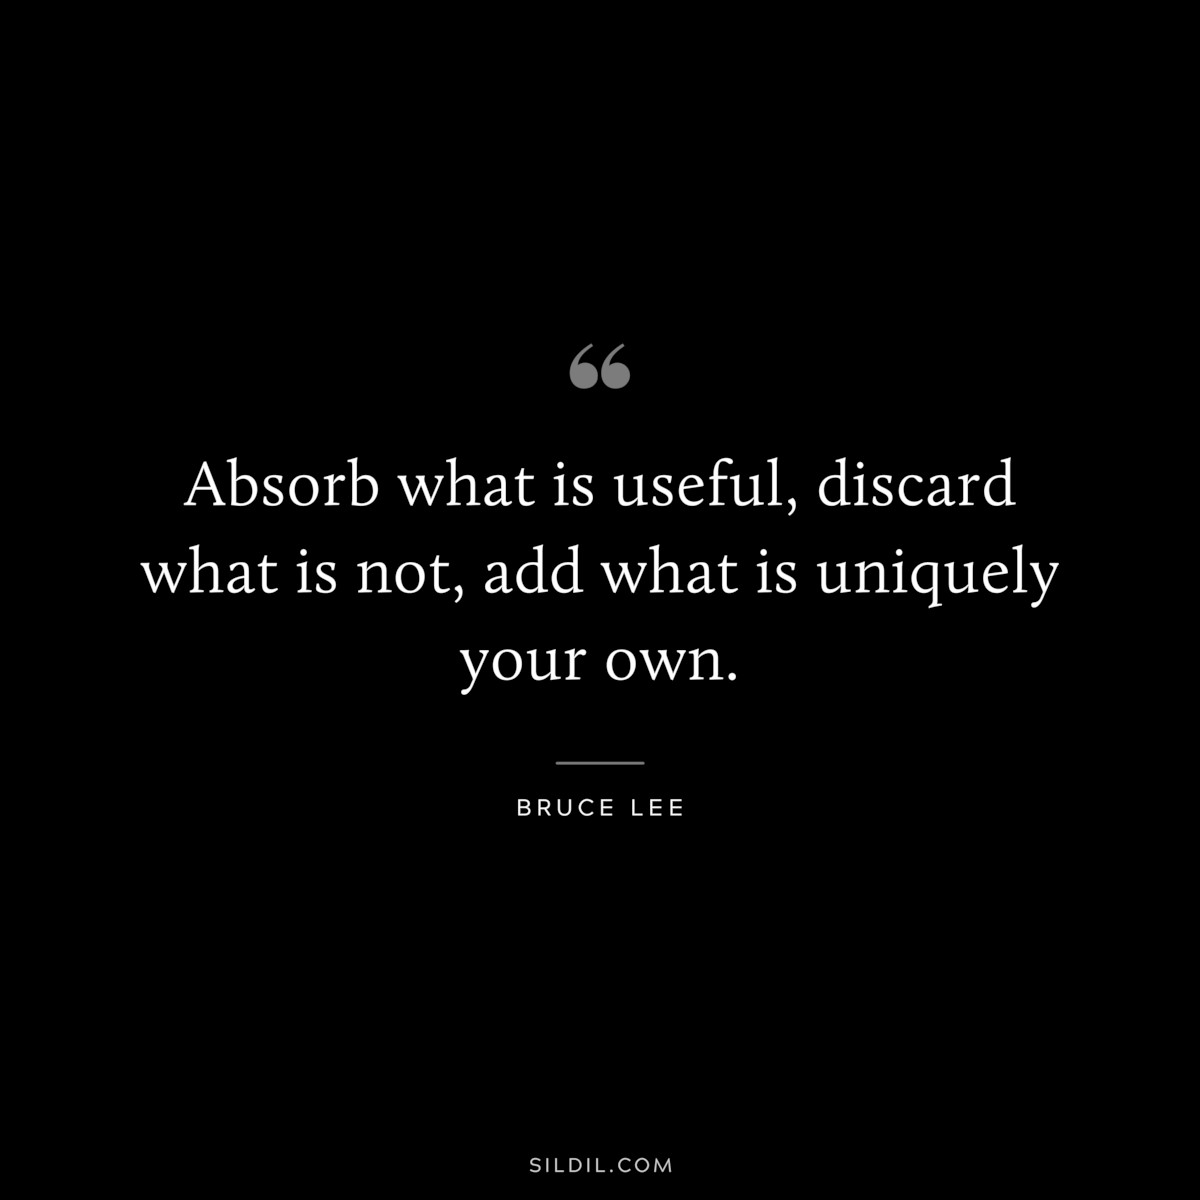 Absorb what is useful, discard what is not, add what is uniquely your own. ― Bruce Lee